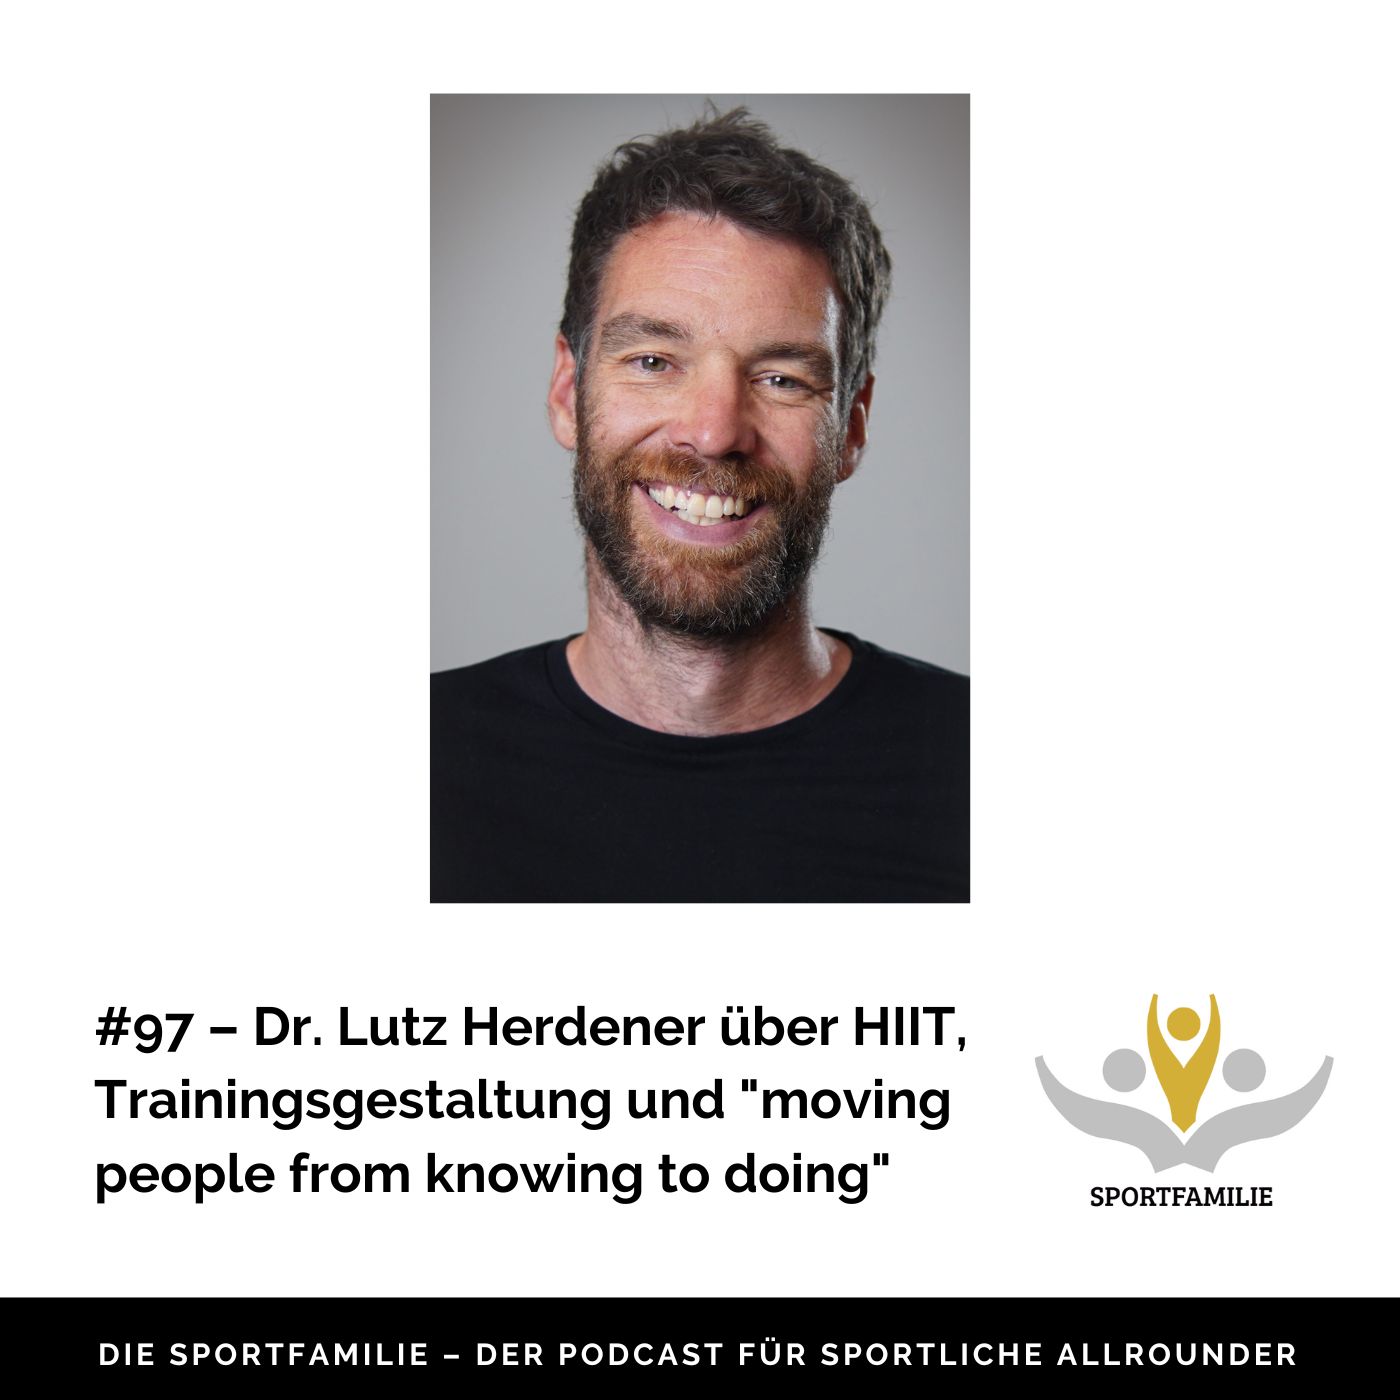 #97 – Dr. Lutz Herdener über HIIT, Trainingsgestaltung und „moving people from knowing to doing“